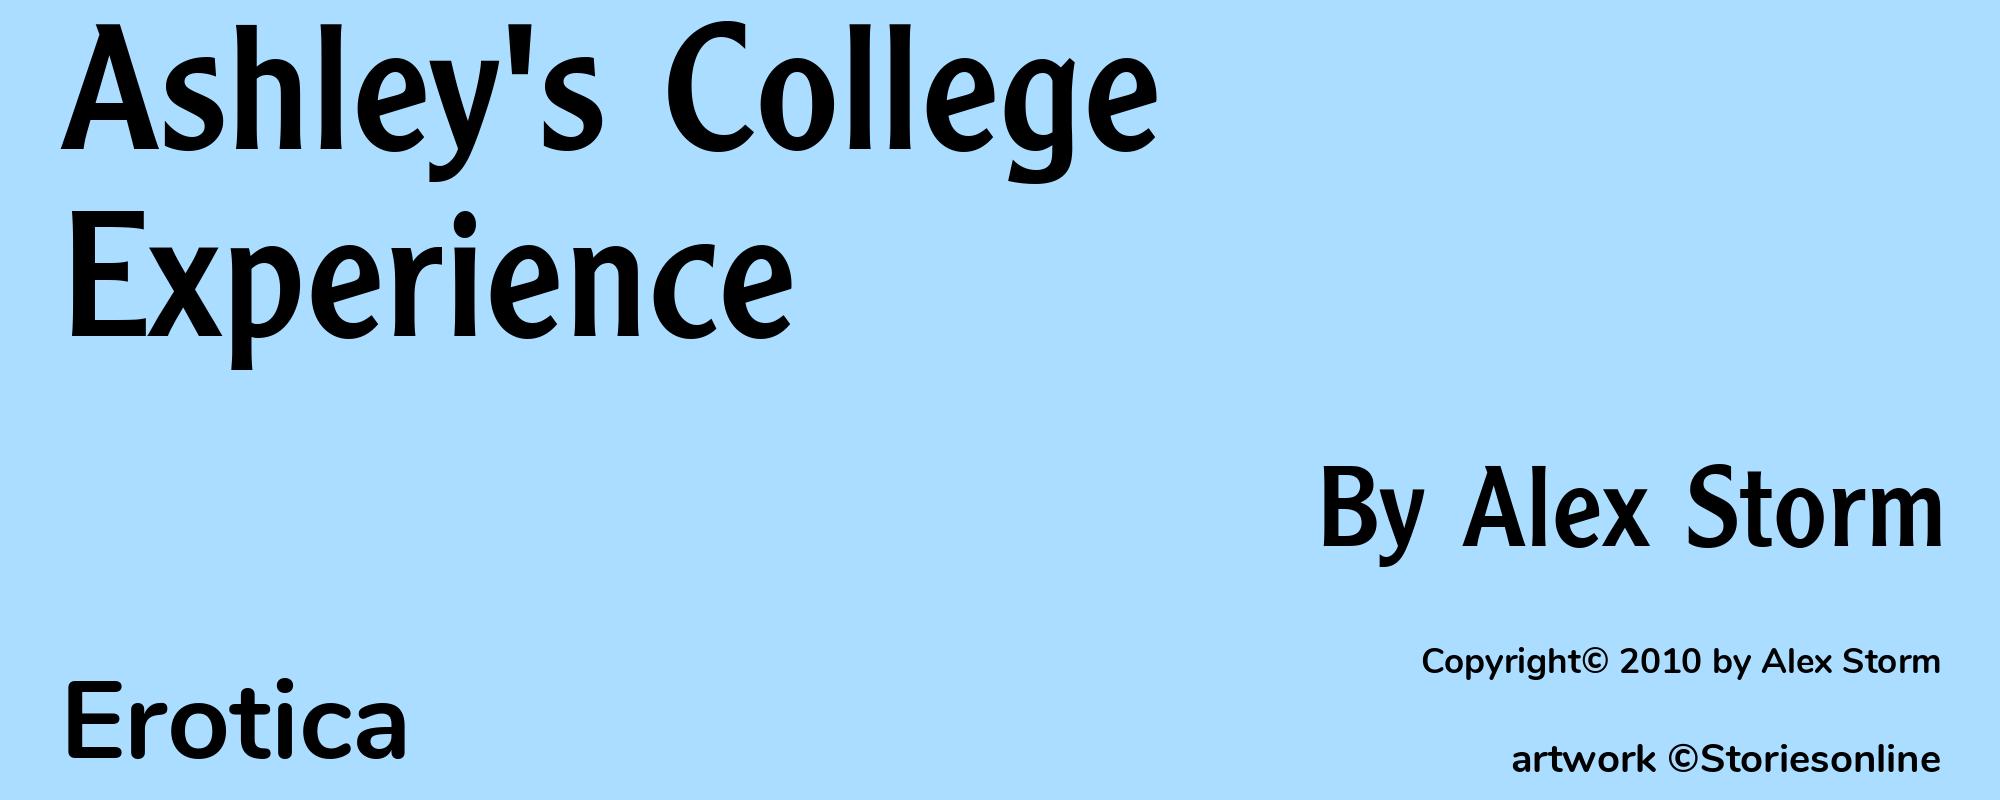 Ashley's College Experience - Cover